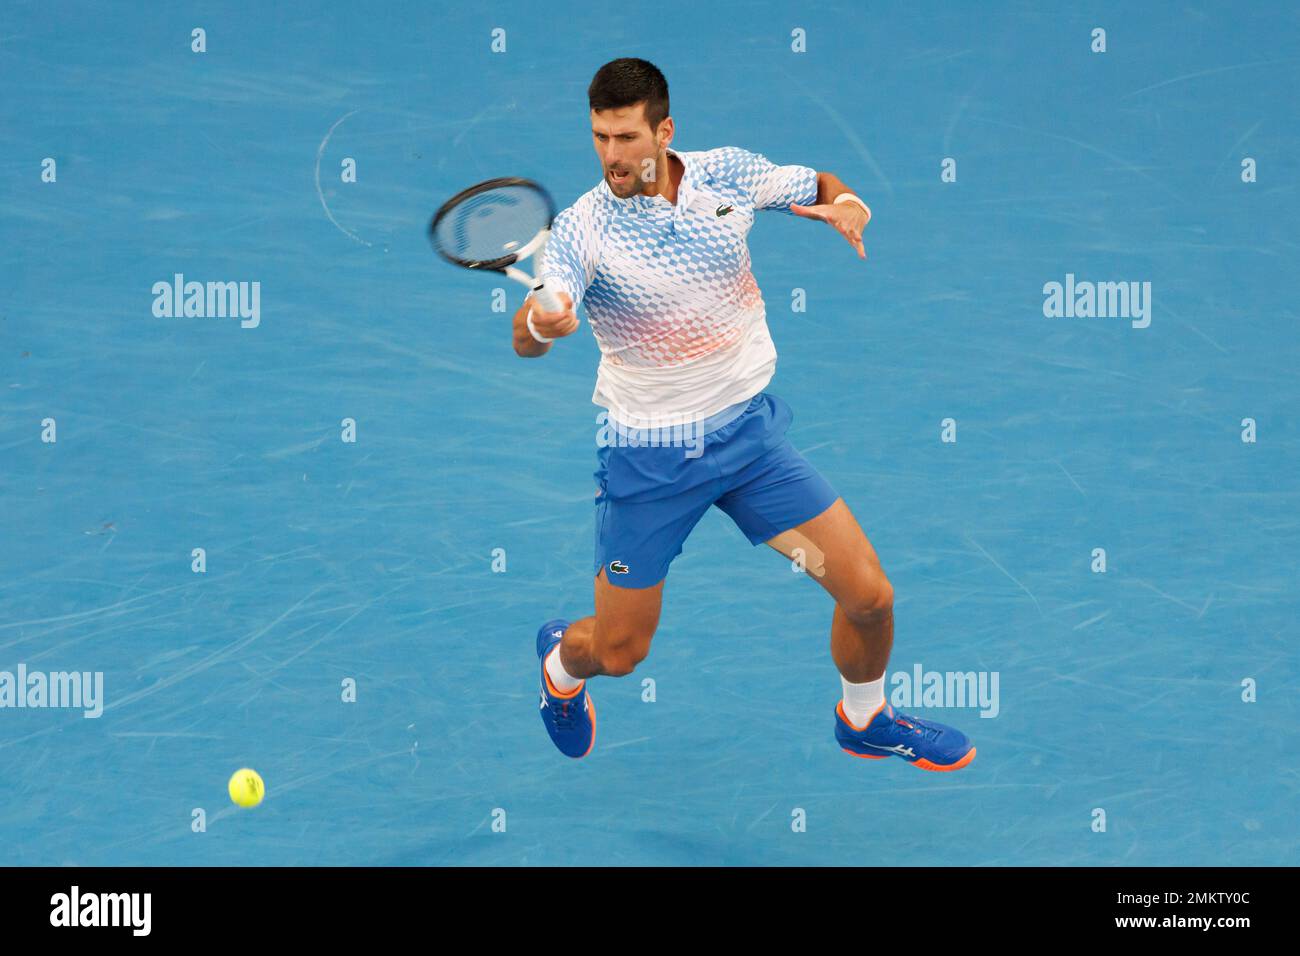 January 29, 2023: 4th seed NOVAK DJOKOVIC of Serbia in action against 3rd  seed STEFANOS TSITSIPAS of Greece on Rod Laver Arena in the Men's Singles  Final match on day 14 of